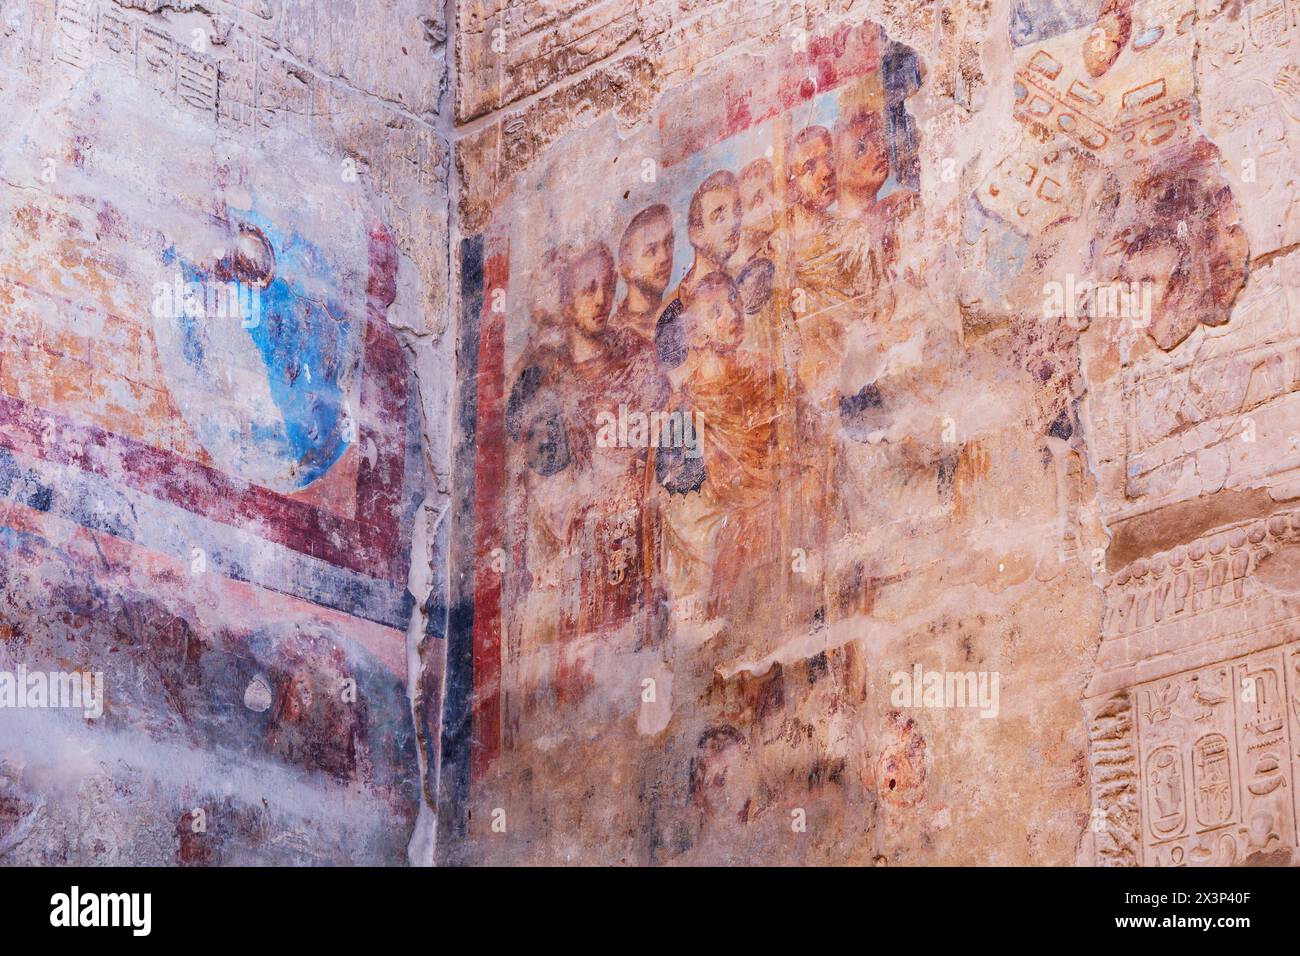 Christian wall paintings, Luxor Temple, Luxor, Egypt Stock Photo